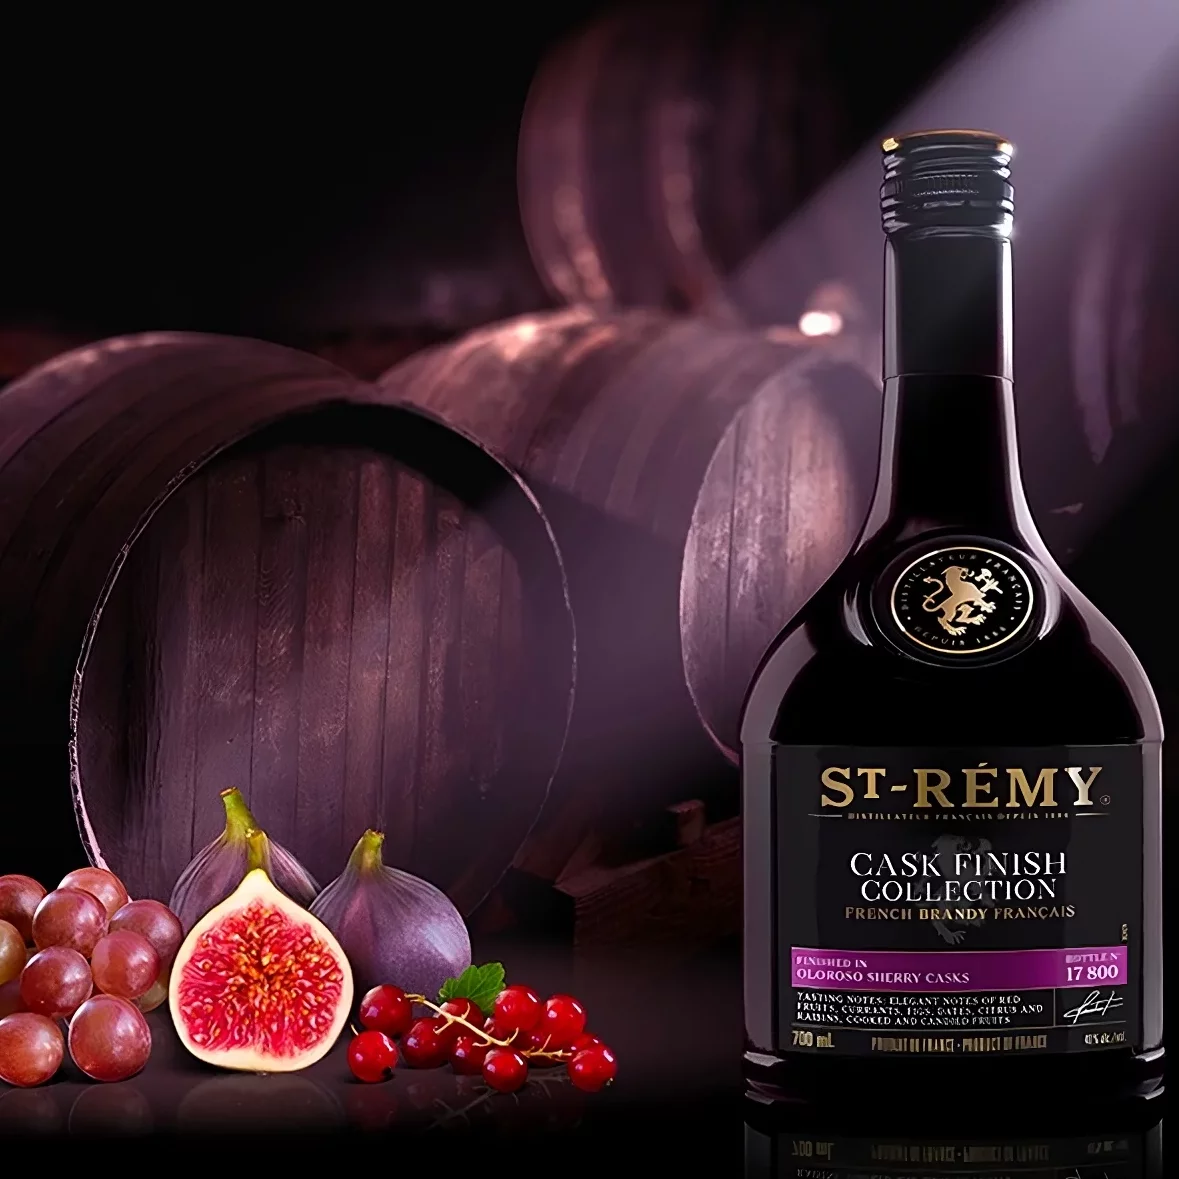 St Remy launches oloroso sherry casks finish collection